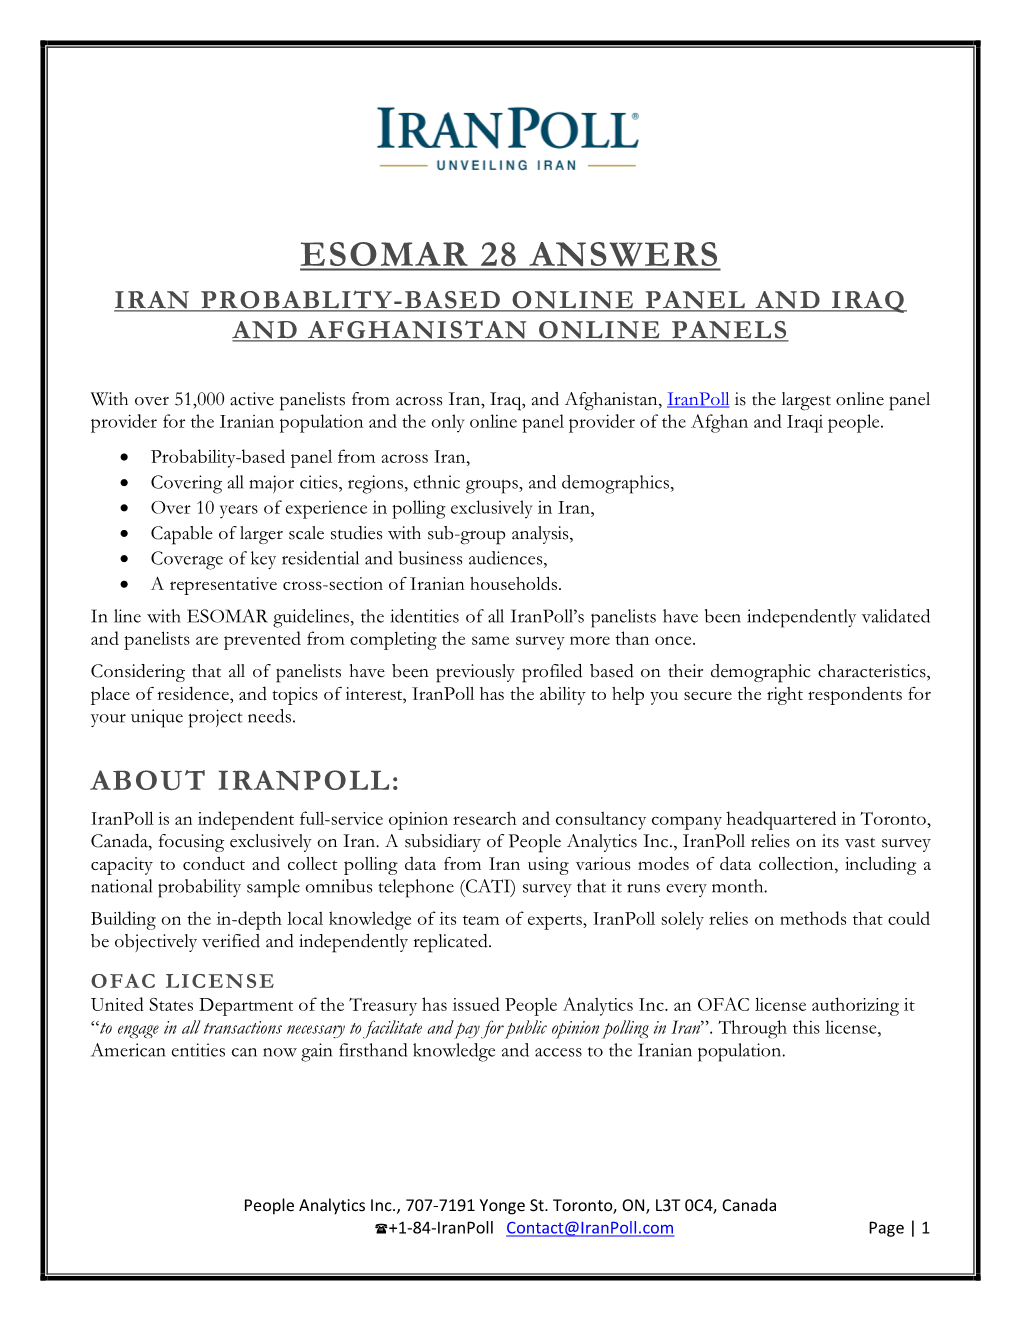 Esomar 28 Answers Iran Probablity-Based Online Panel and Iraq and Afghanistan Online Panels